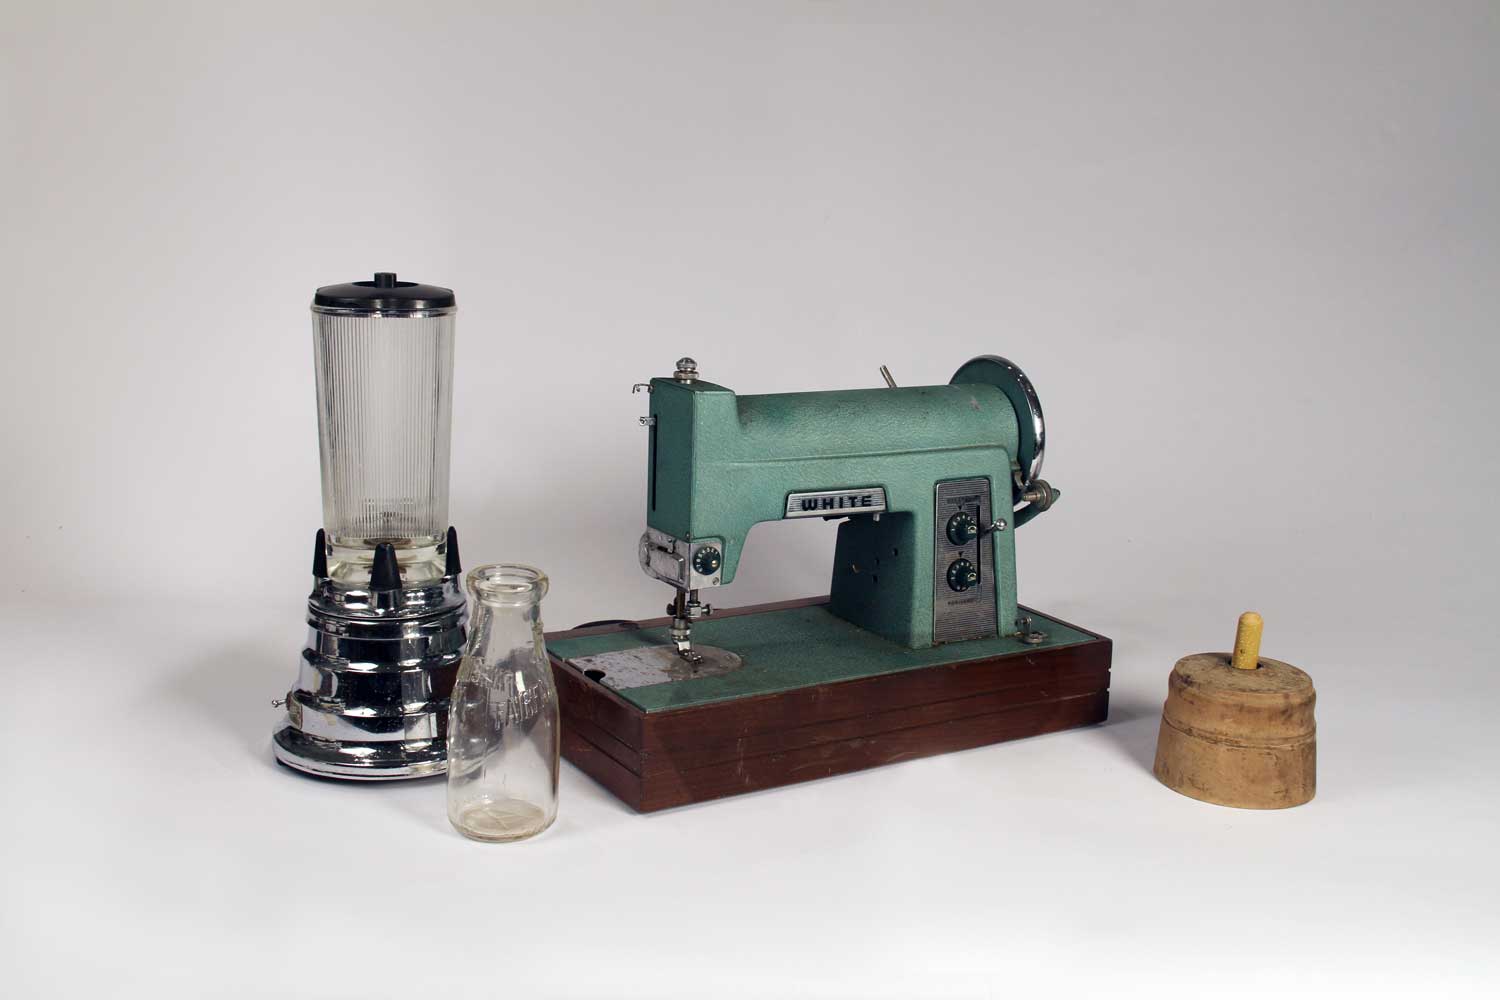 Waring Blender, 1947; Milk bottle, mid-20th century; Sewing Machine, late 19th century; Butter mold, 1920s. Photo by Museum staff.